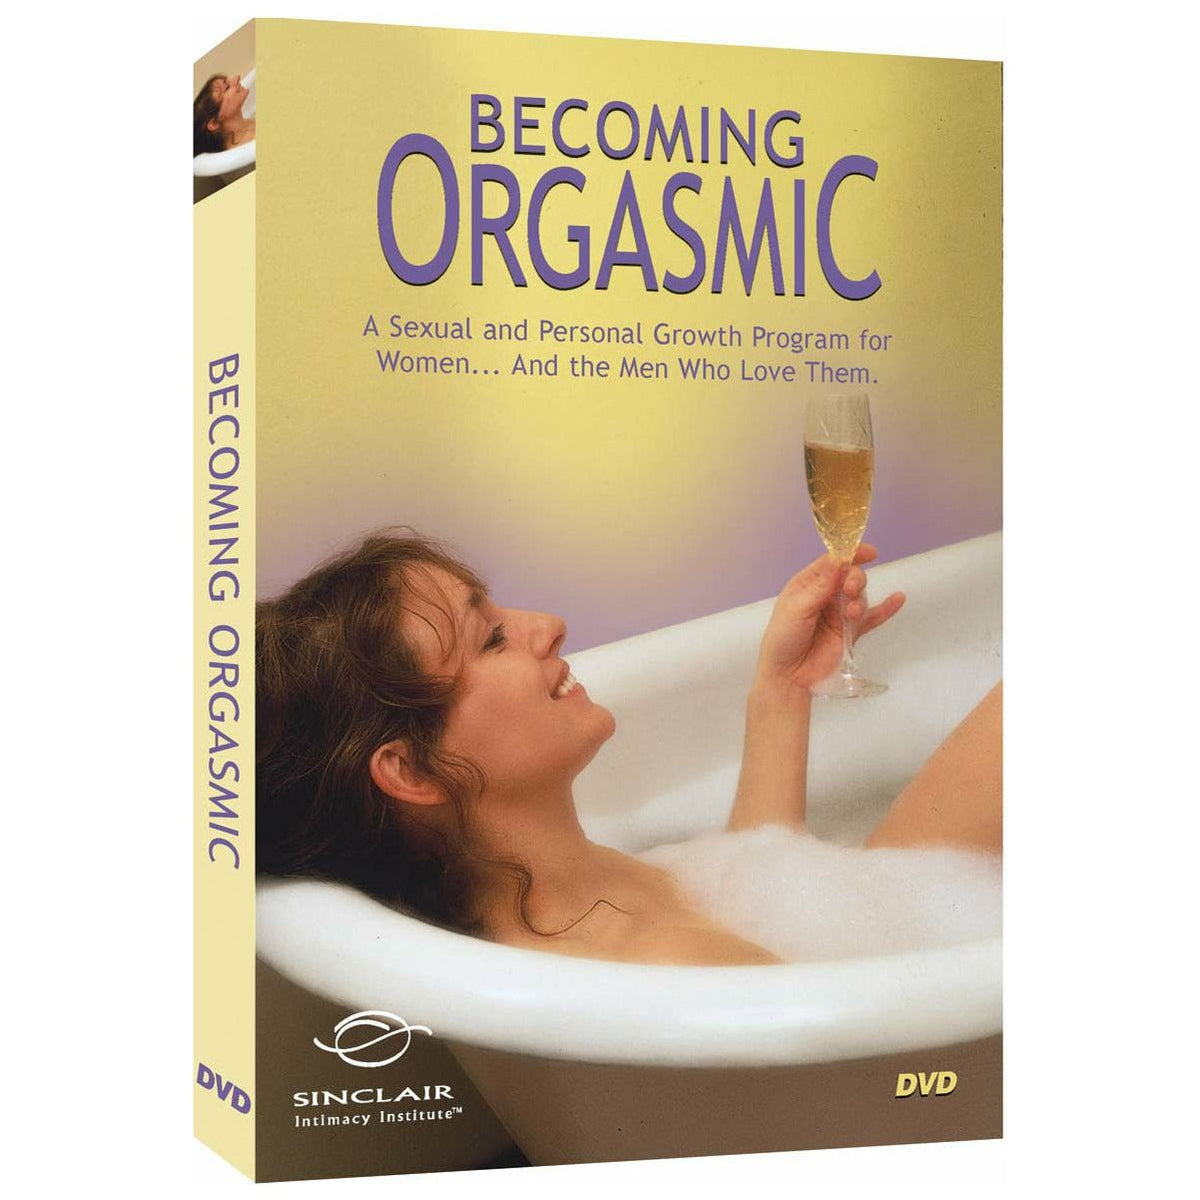 Sinclair Intimacy Institute Becoming Orgasmic DVD